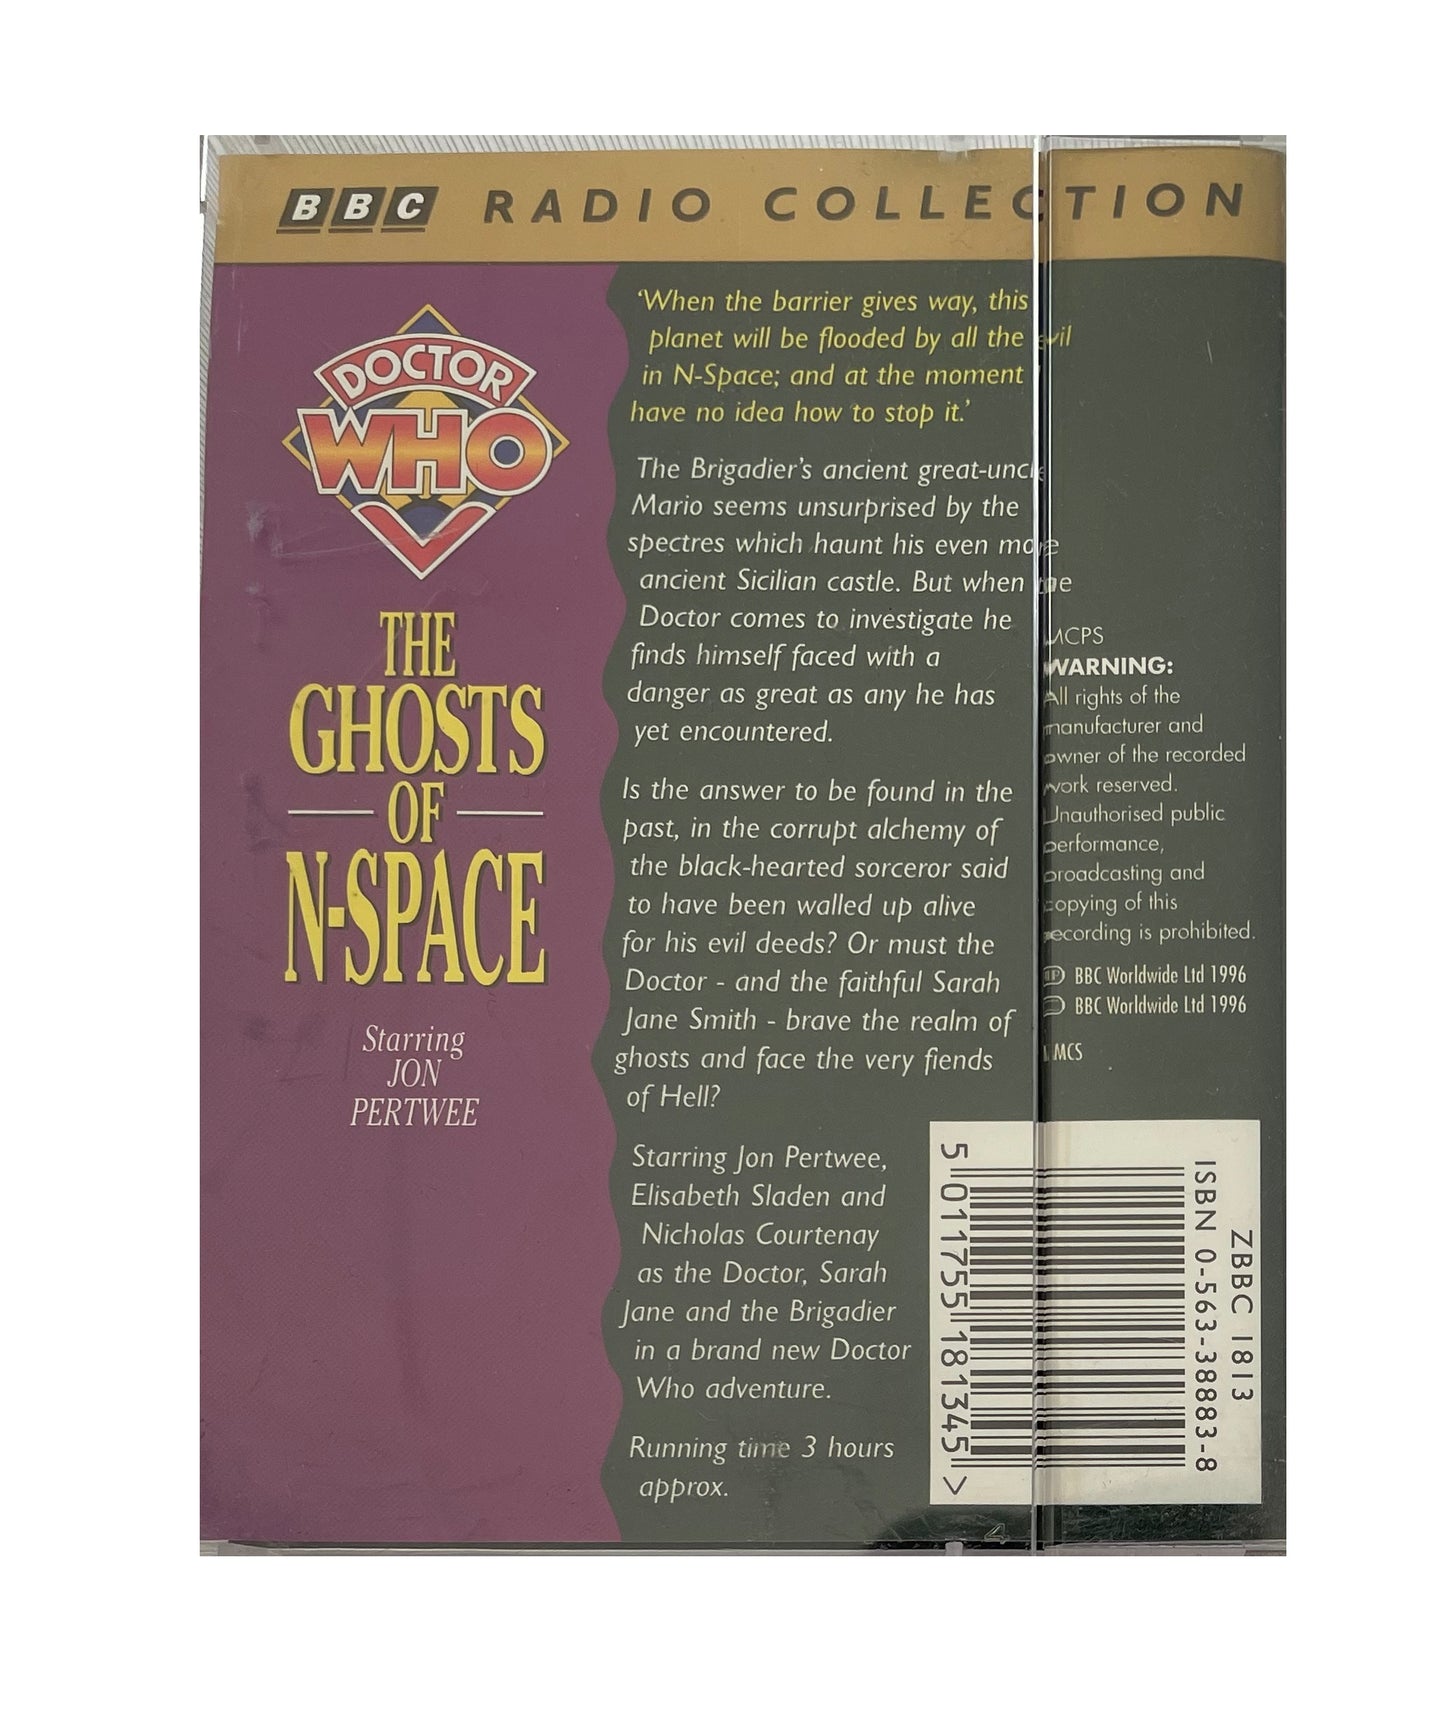 Vintage 1996 BBC Radio Collection - Doctor Dr Who - The Ghosts Of N-Space Double Audio Cassette Set - Shop Stock Room Find